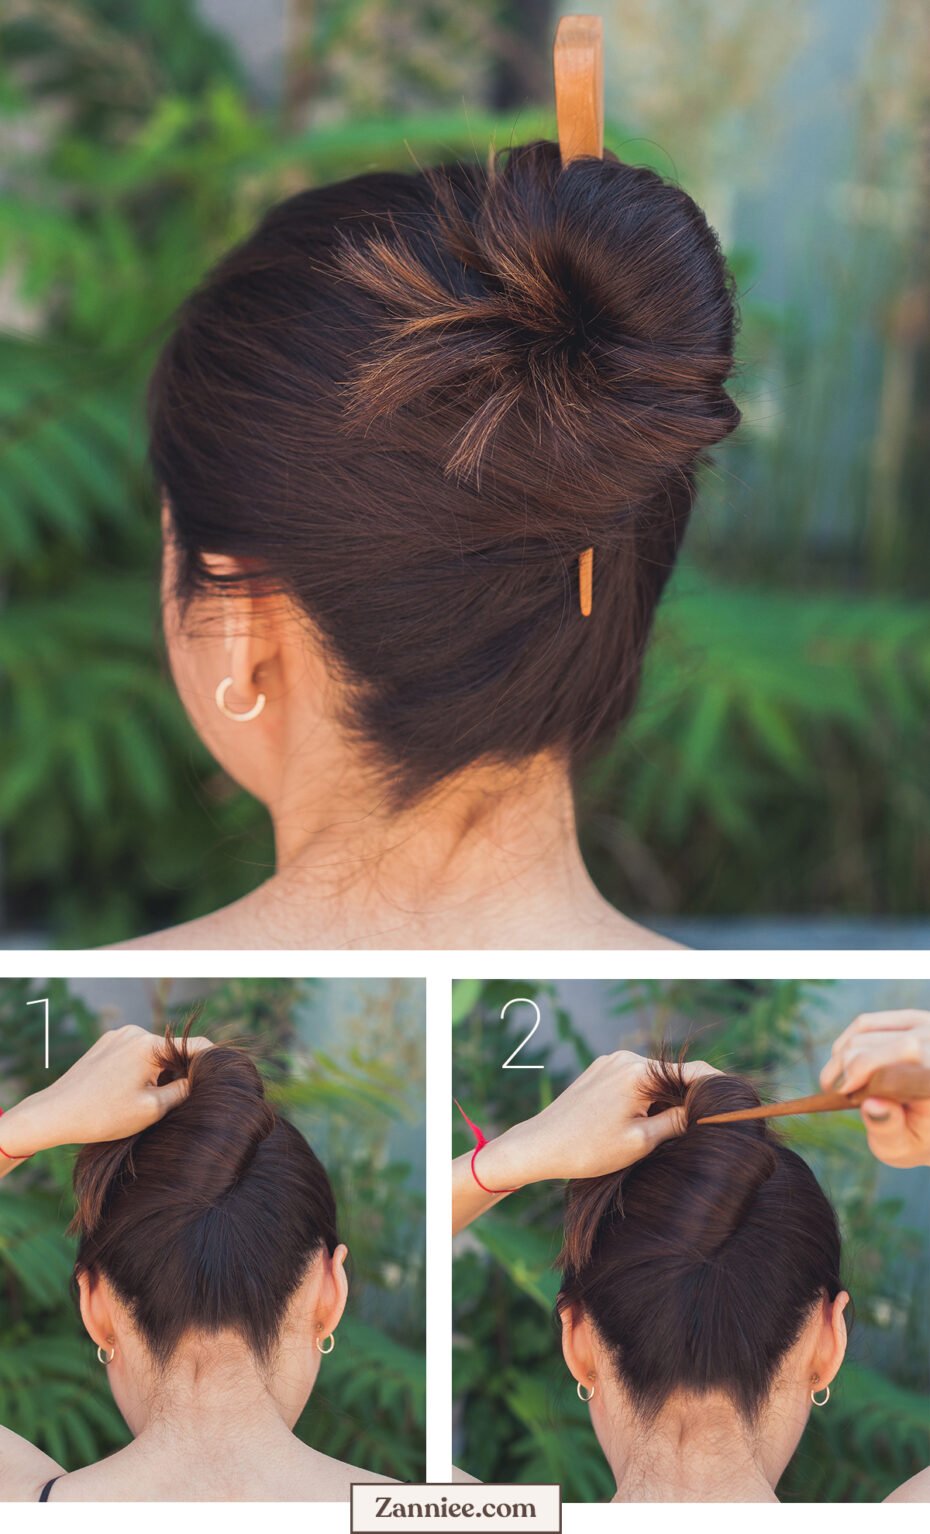 latest juda hairstyle | chignon hairstyle | juda | hair style girl | easy  hairstyles | hairstyle | Hii friends in this video i am showing hairbun  inspired by sonam kapoor.This hairstyle